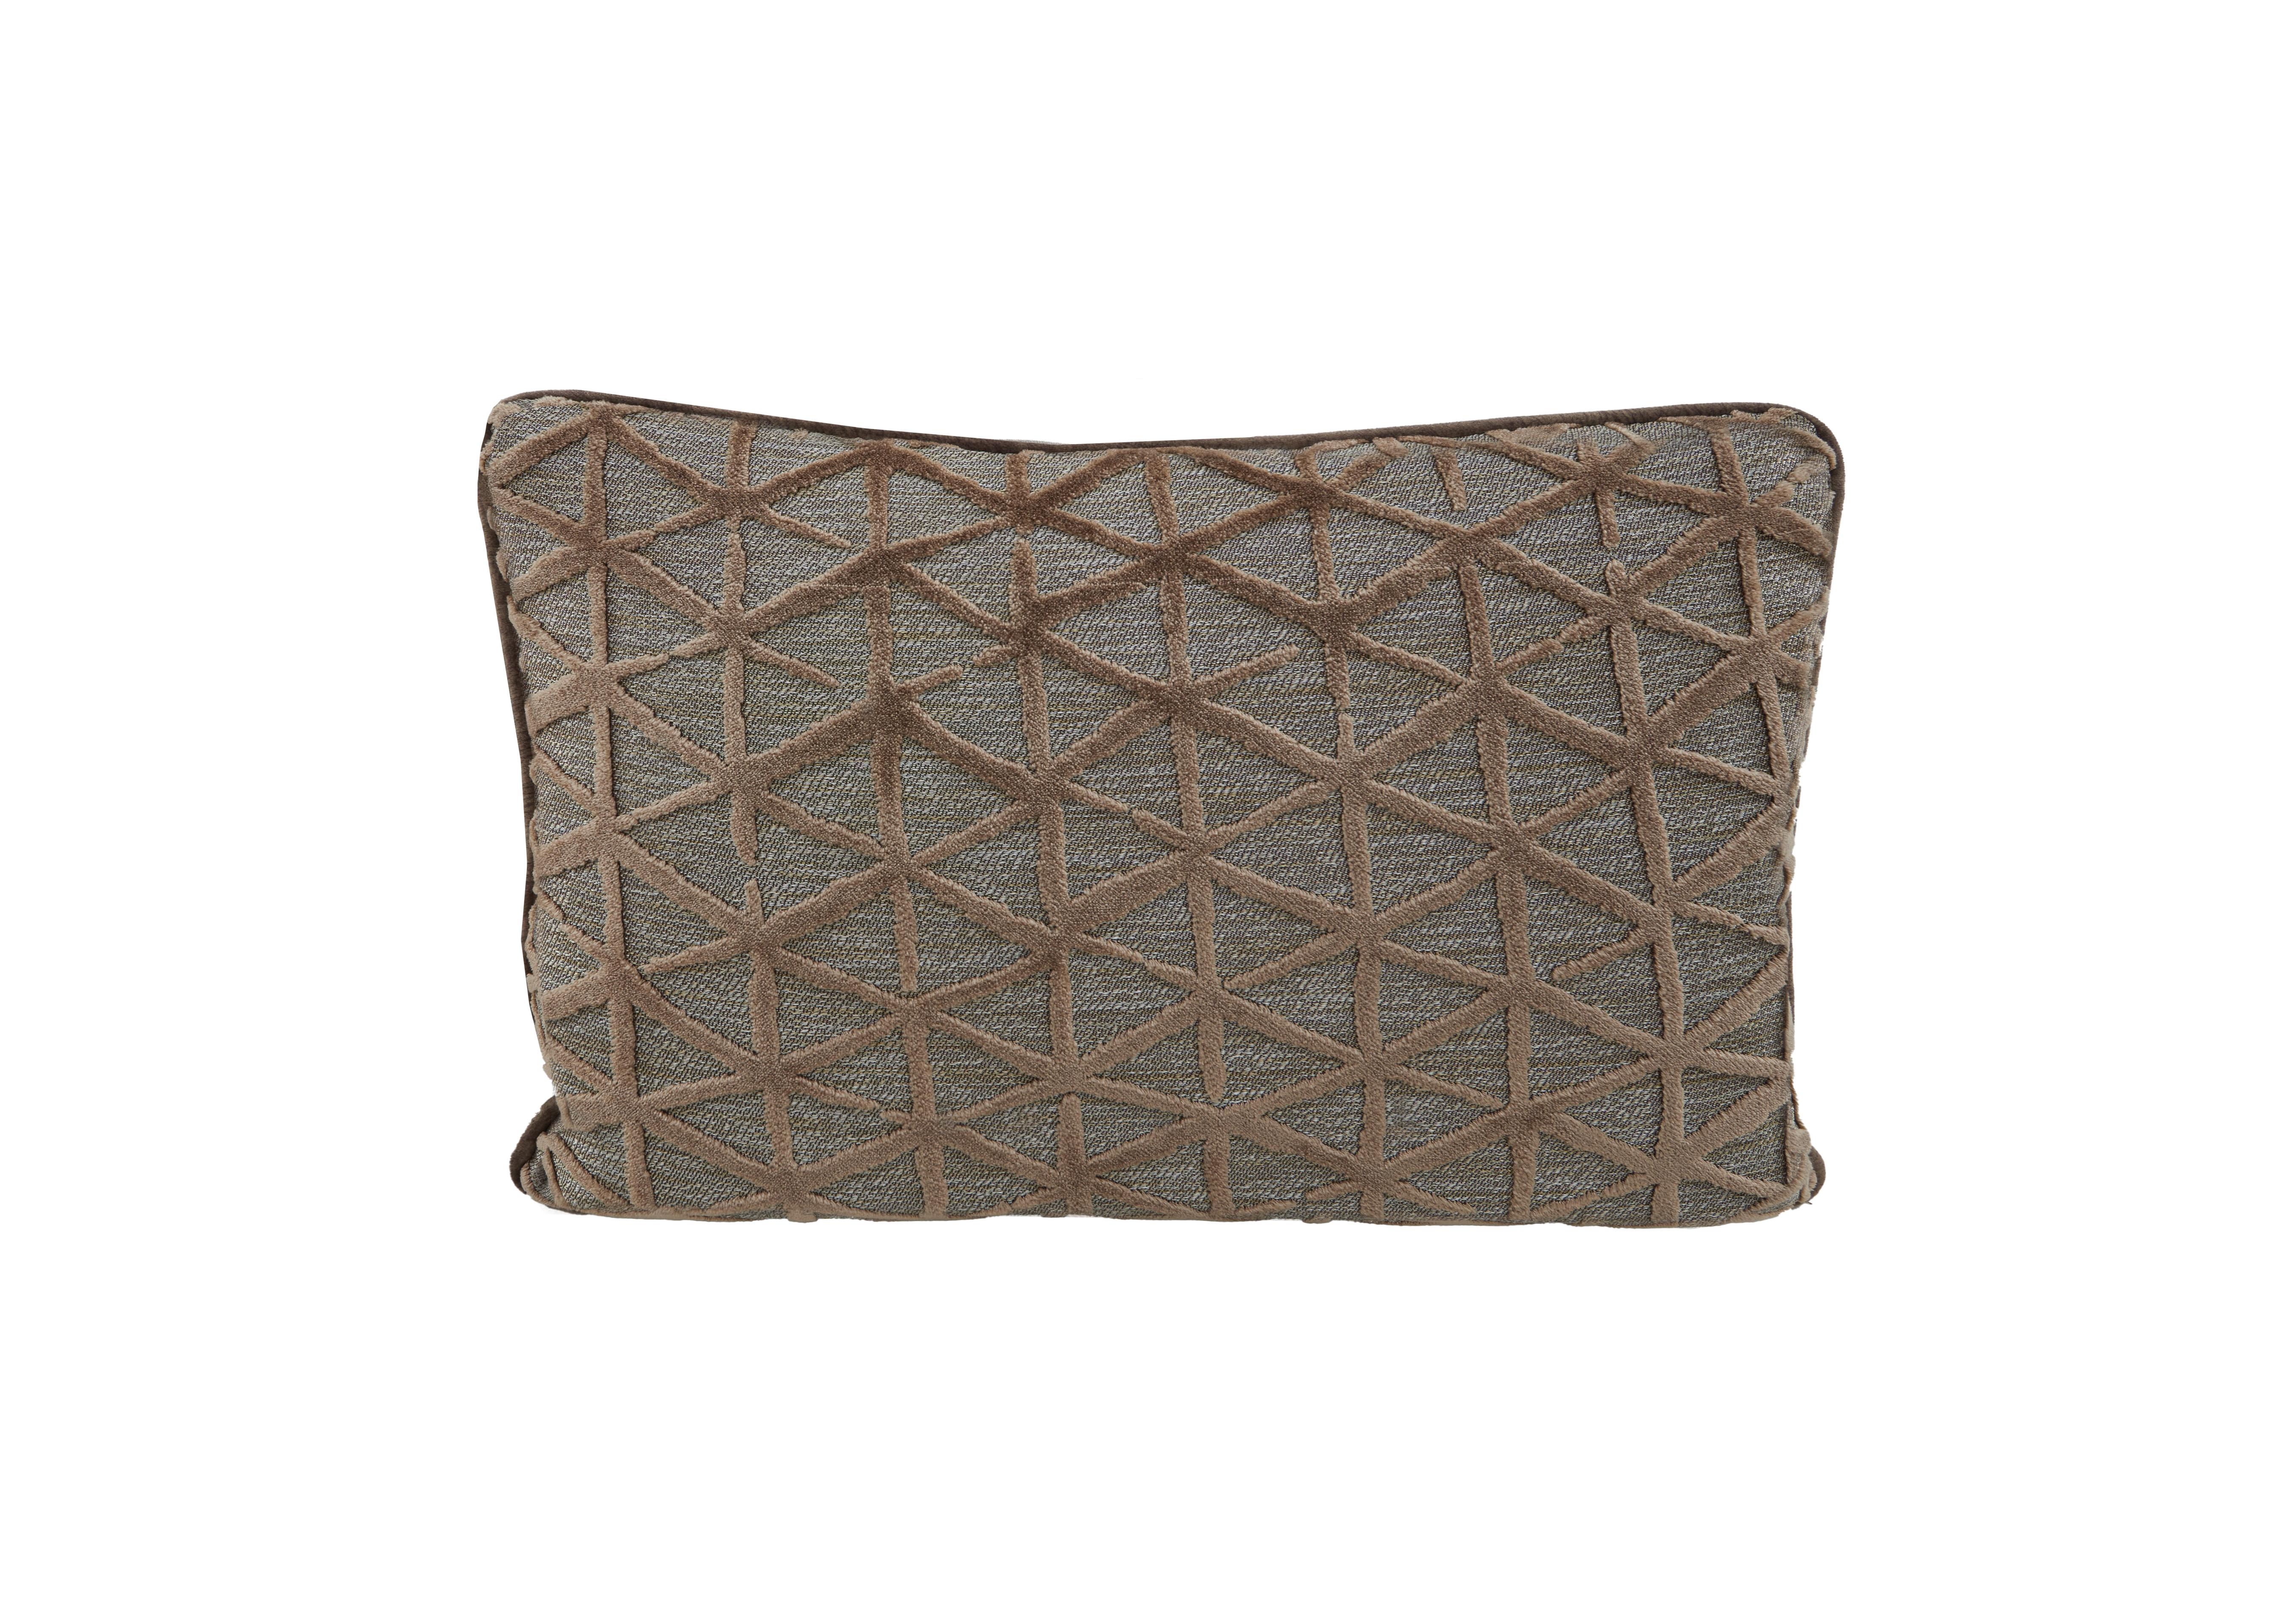 Ariana Bolster Cushion in Trilogy Chocolate on Furniture Village